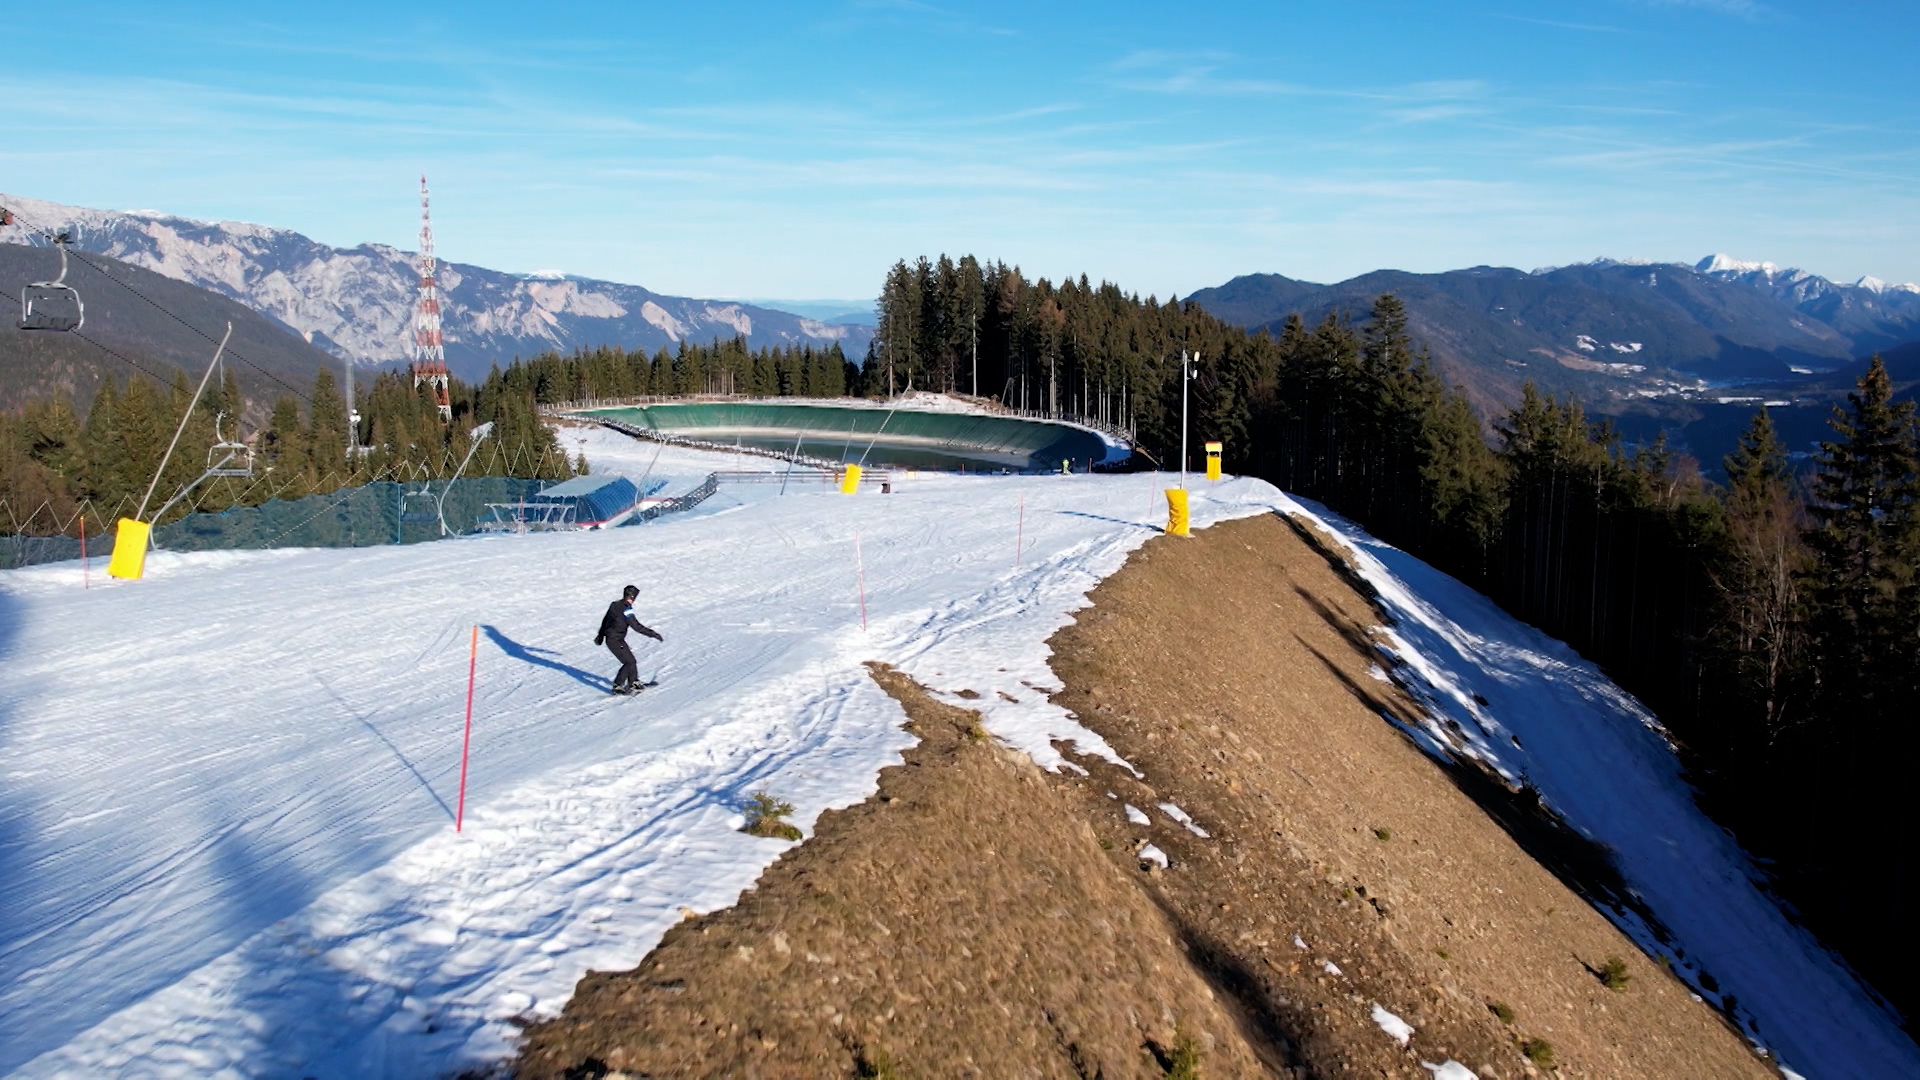 Slopes at Italy's Tarvisio resort descend to 800 meters, where predicted snowfall will turn to rain. /Andreas Gasser/CGTN